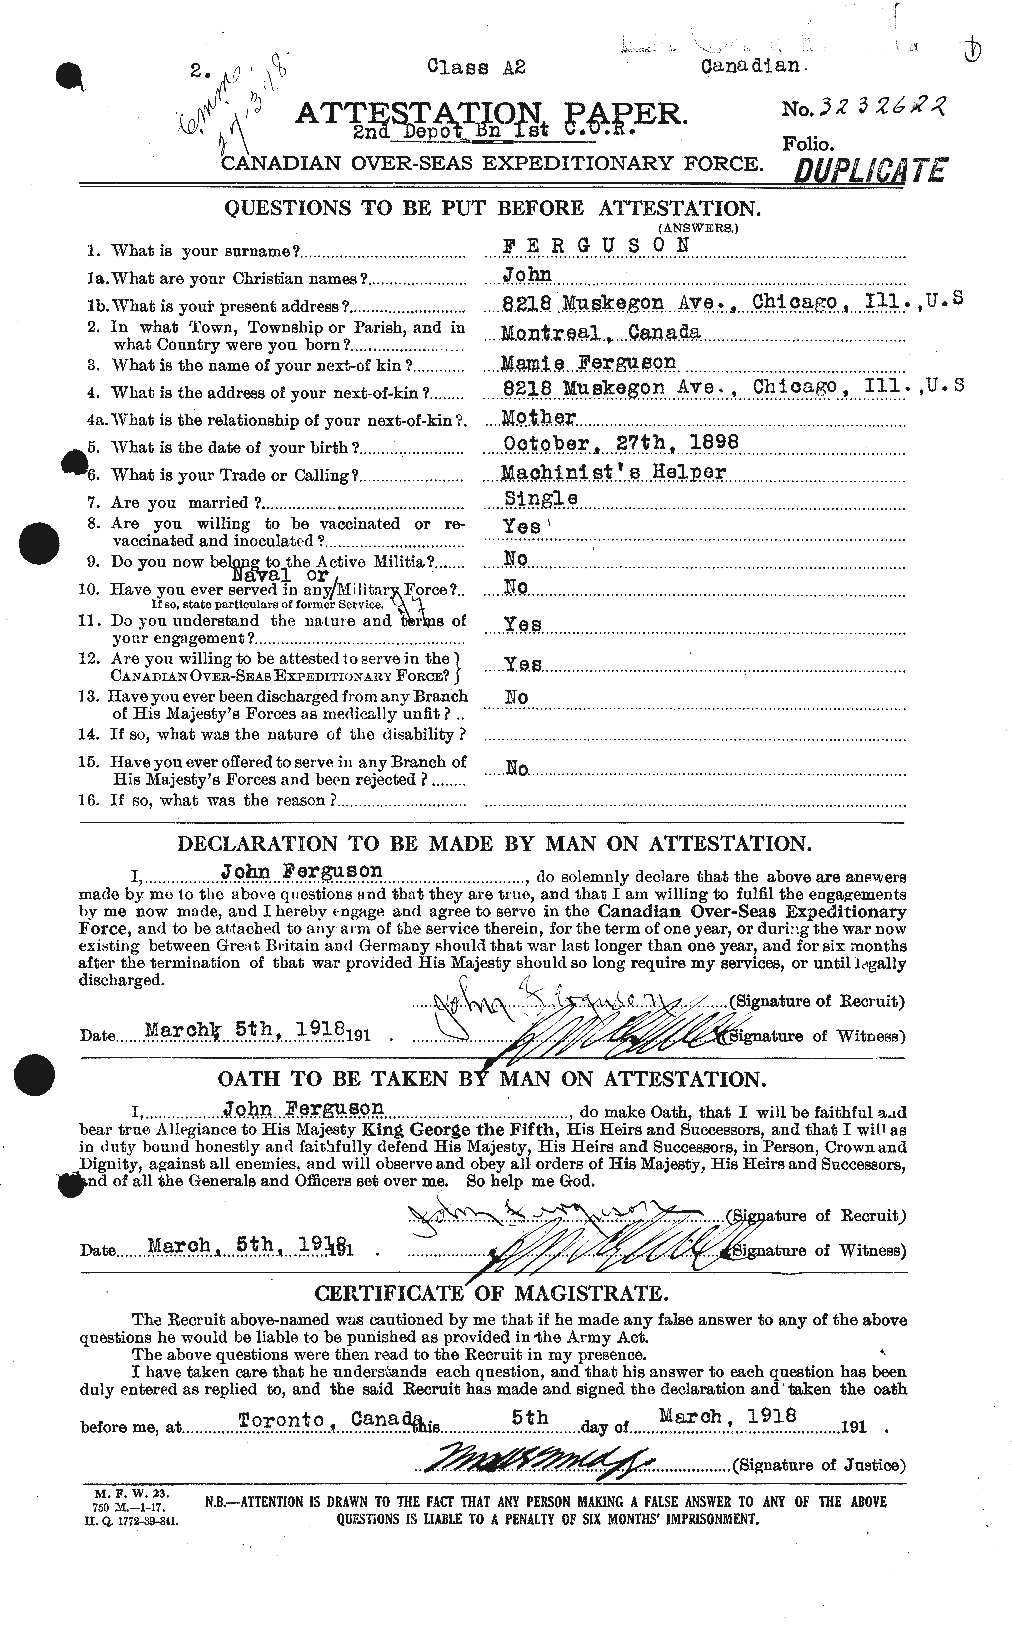 Personnel Records of the First World War - CEF 320316a